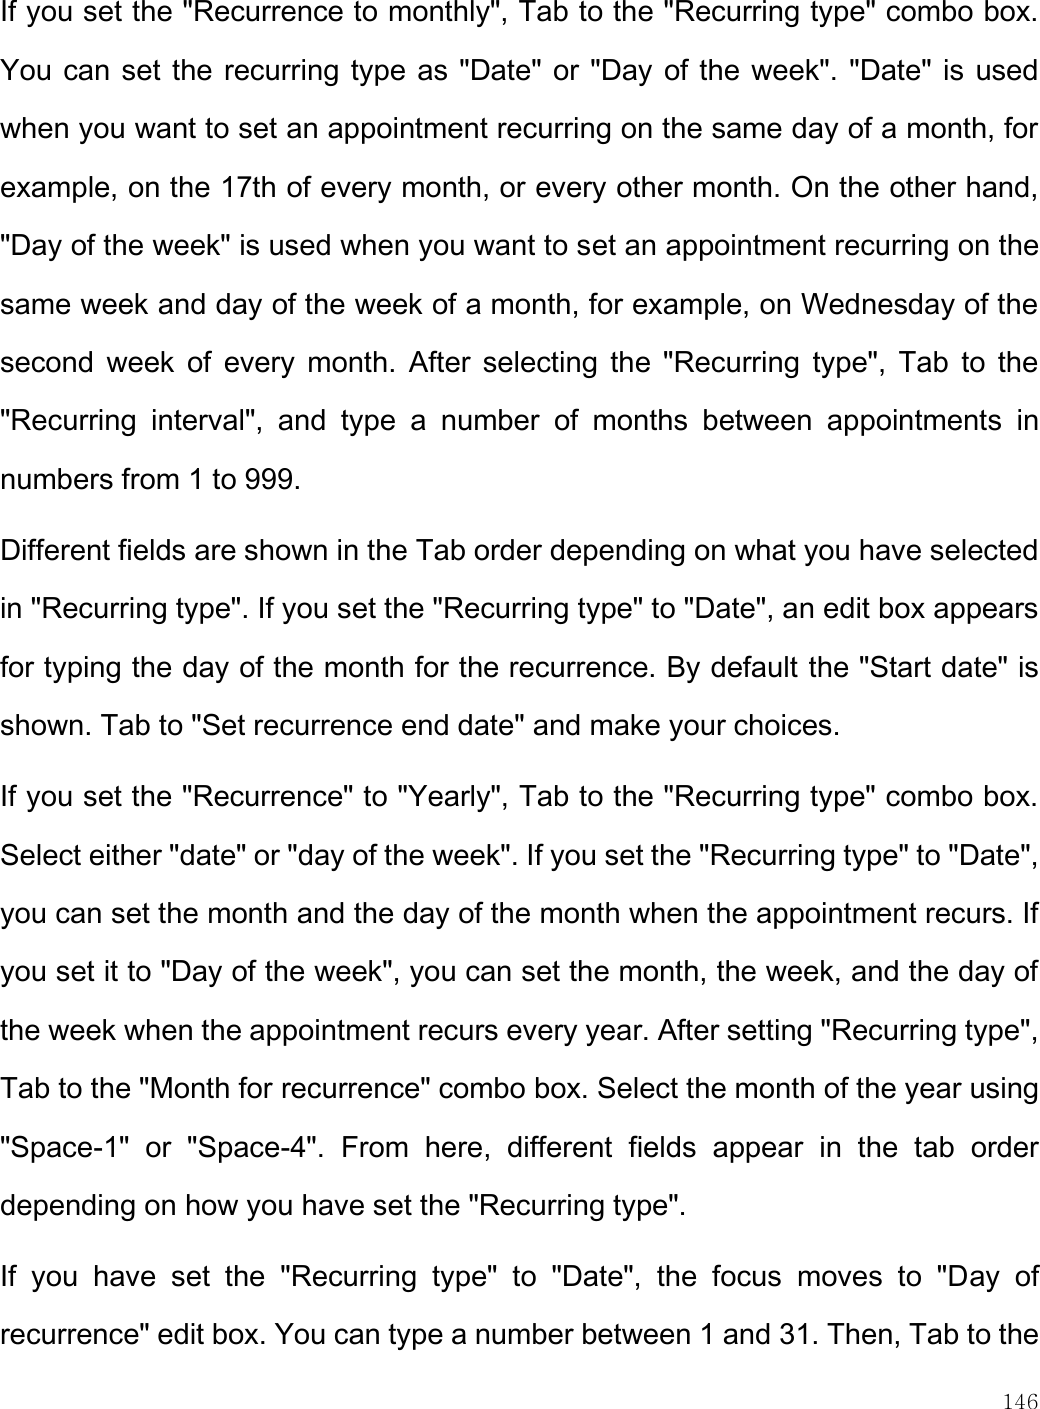    146  If you set the &quot;Recurrence to monthly&quot;, Tab to the &quot;Recurring type&quot; combo box. You can set the recurring type as &quot;Date&quot; or &quot;Day of the week&quot;. &quot;Date&quot; is used when you want to set an appointment recurring on the same day of a month, for example, on the 17th of every month, or every other month. On the other hand, &quot;Day of the week&quot; is used when you want to set an appointment recurring on the same week and day of the week of a month, for example, on Wednesday of the second  week  of  every  month.  After  selecting the  &quot;Recurring  type&quot;, Tab  to the &quot;Recurring  interval&quot;,  and  type  a  number  of  months  between  appointments  in numbers from 1 to 999.  Different fields are shown in the Tab order depending on what you have selected in &quot;Recurring type&quot;. If you set the &quot;Recurring type&quot; to &quot;Date&quot;, an edit box appears for typing the day of the month for the recurrence. By default the &quot;Start date&quot; is shown. Tab to &quot;Set recurrence end date&quot; and make your choices. If you set the &quot;Recurrence&quot; to &quot;Yearly&quot;, Tab to the &quot;Recurring type&quot; combo box. Select either &quot;date&quot; or &quot;day of the week&quot;. If you set the &quot;Recurring type&quot; to &quot;Date&quot;, you can set the month and the day of the month when the appointment recurs. If you set it to &quot;Day of the week&quot;, you can set the month, the week, and the day of the week when the appointment recurs every year. After setting &quot;Recurring type&quot;, Tab to the &quot;Month for recurrence&quot; combo box. Select the month of the year using &quot;Space-1&quot;  or  &quot;Space-4&quot;.  From  here,  different  fields  appear  in  the  tab  order depending on how you have set the &quot;Recurring type&quot;.  If  you  have  set  the  &quot;Recurring  type&quot;  to  &quot;Date&quot;,  the  focus  moves  to  &quot;Day  of recurrence&quot; edit box. You can type a number between 1 and 31. Then, Tab to the 